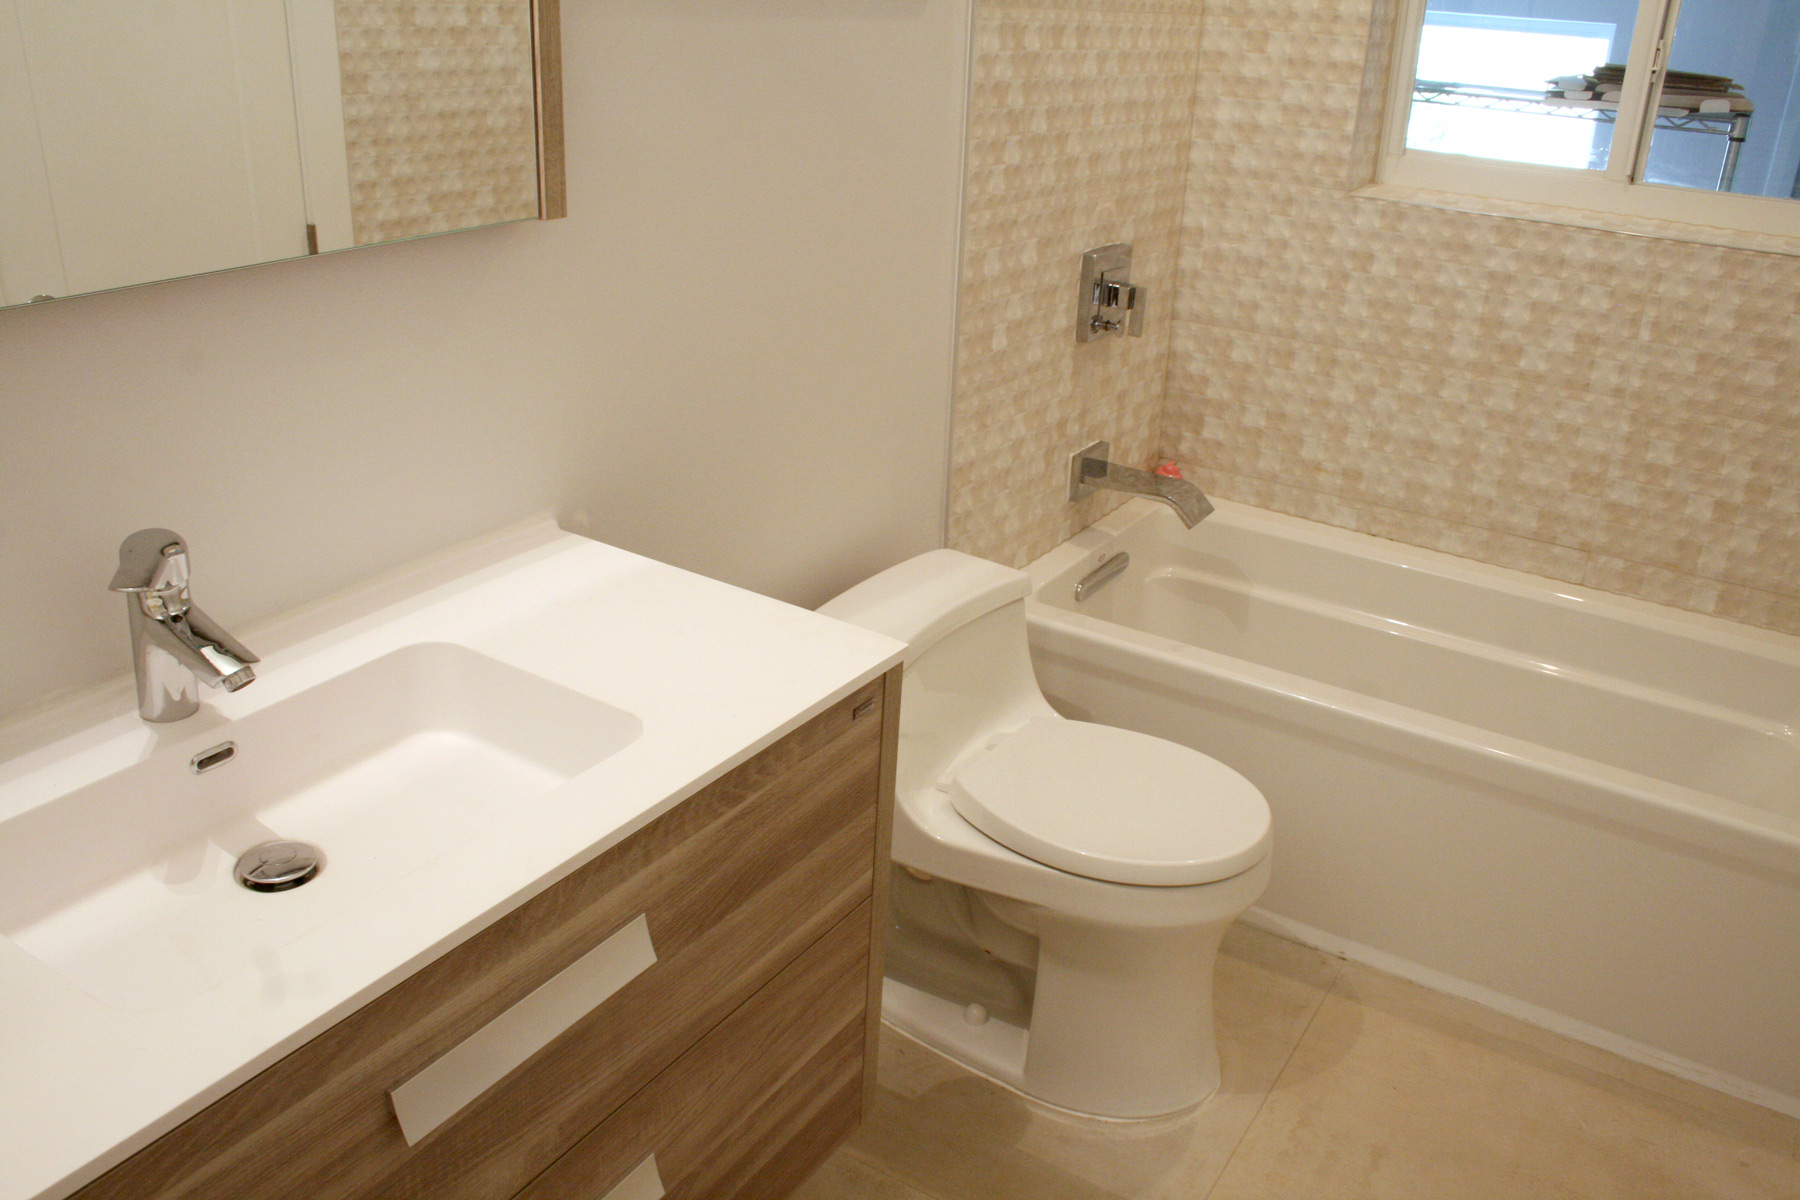 Remodeled bathroom with new wall-mounted vanity, toilet, tub and porcelain tiles